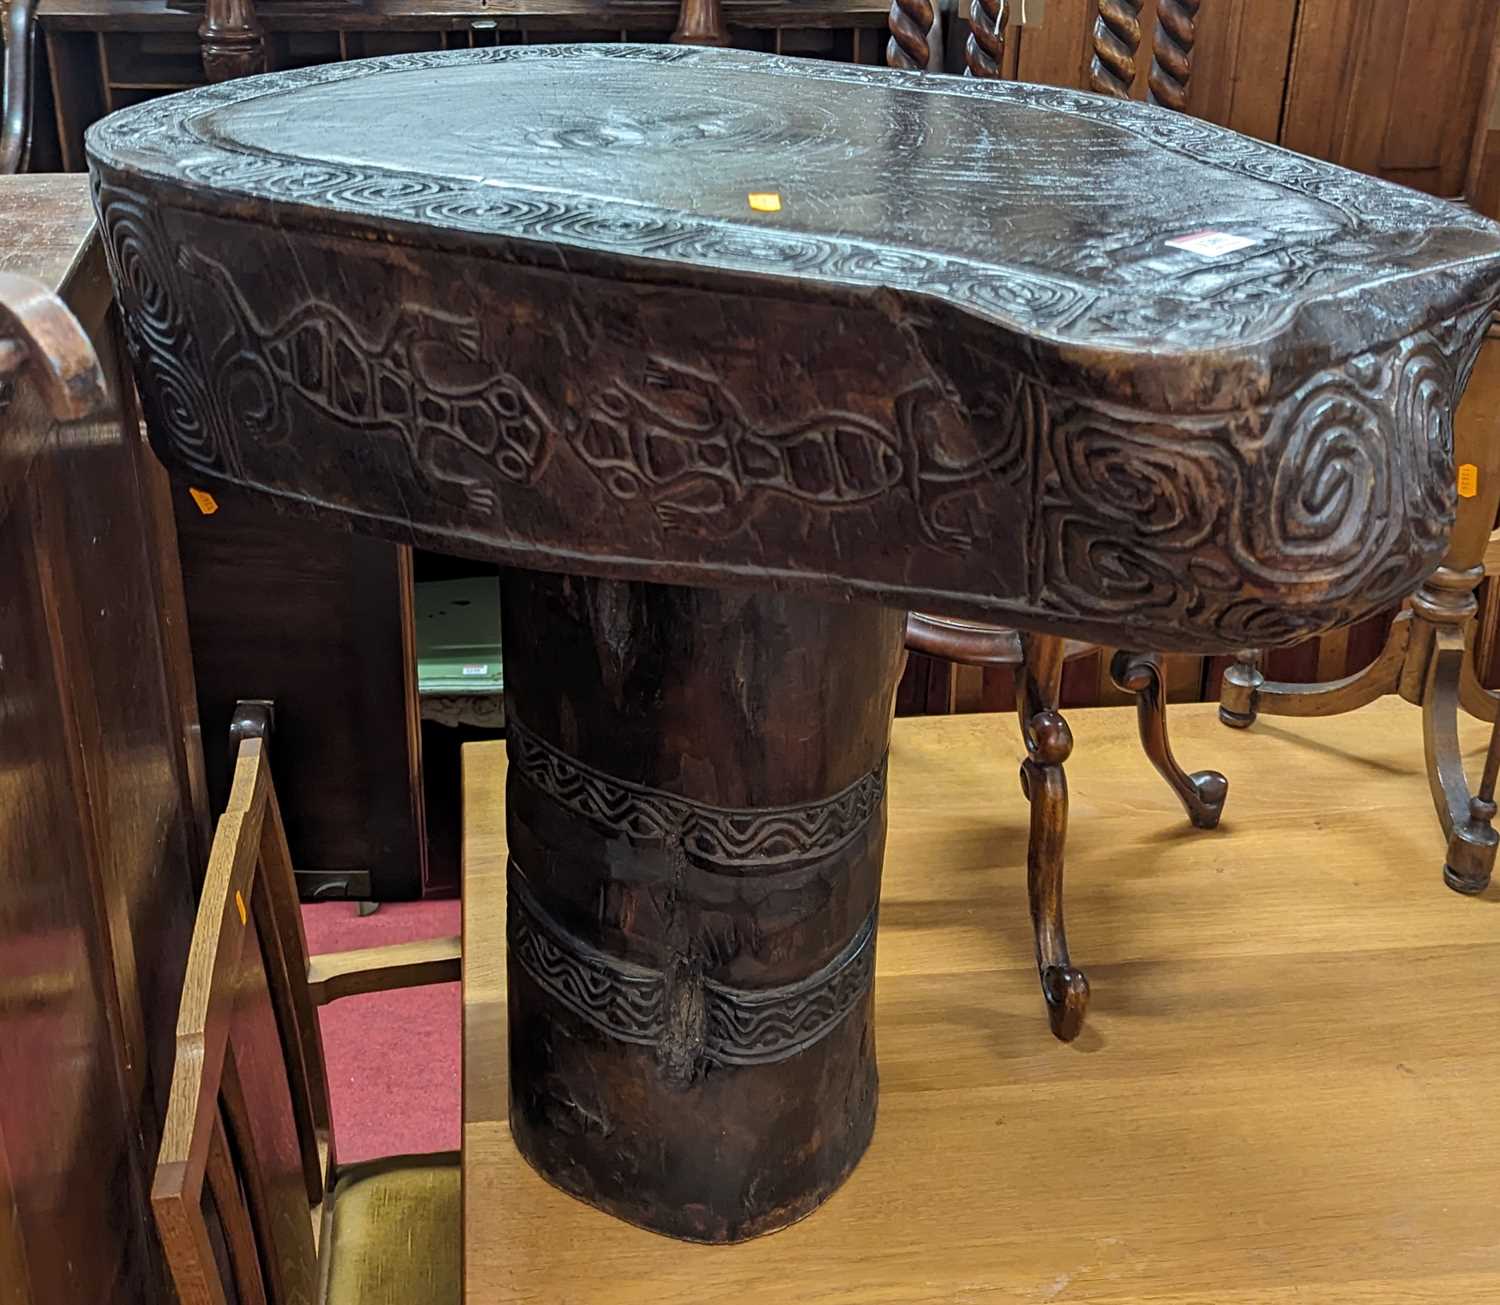 An Indonesian Saur tree slab table from the island of Timor, with stylised carved banded design,